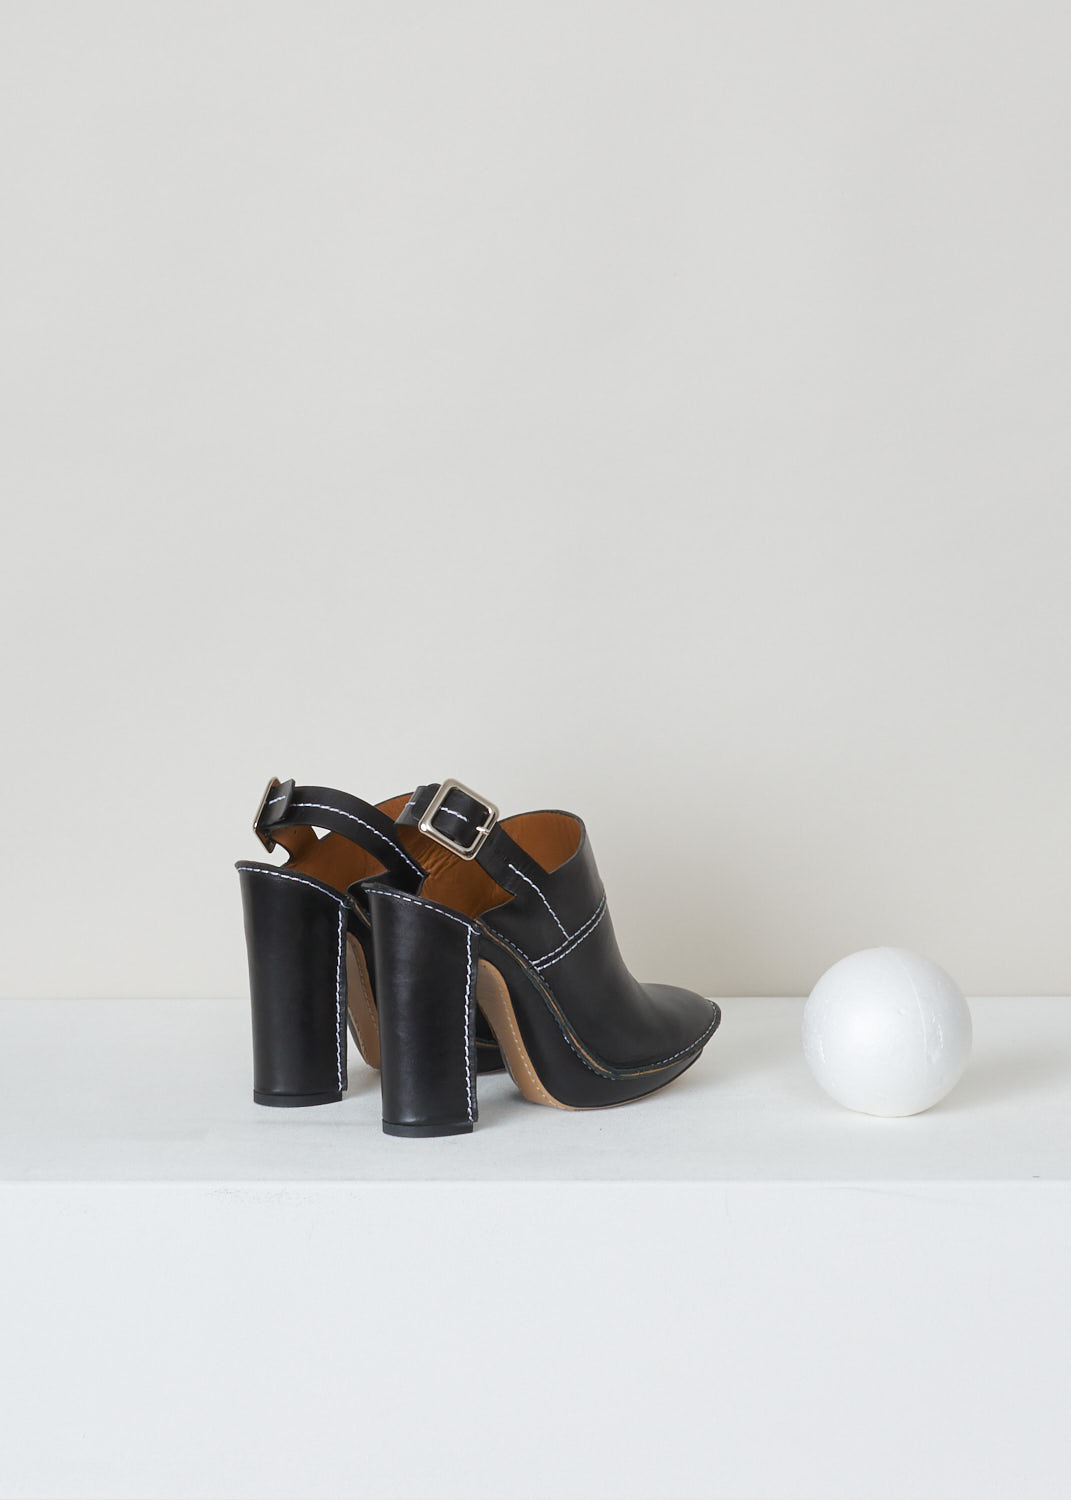 ChloÃ©, Black clog mule with white stitching, CH25041_10ASW_L5L7_999_black, white, back, These black clog mules feature a round toe, slip-on design and a buckle to tie around anckle. The contrasting white stitching adds charm to these clog mules.

Heel height: 11,5 cm / 4.33 inch